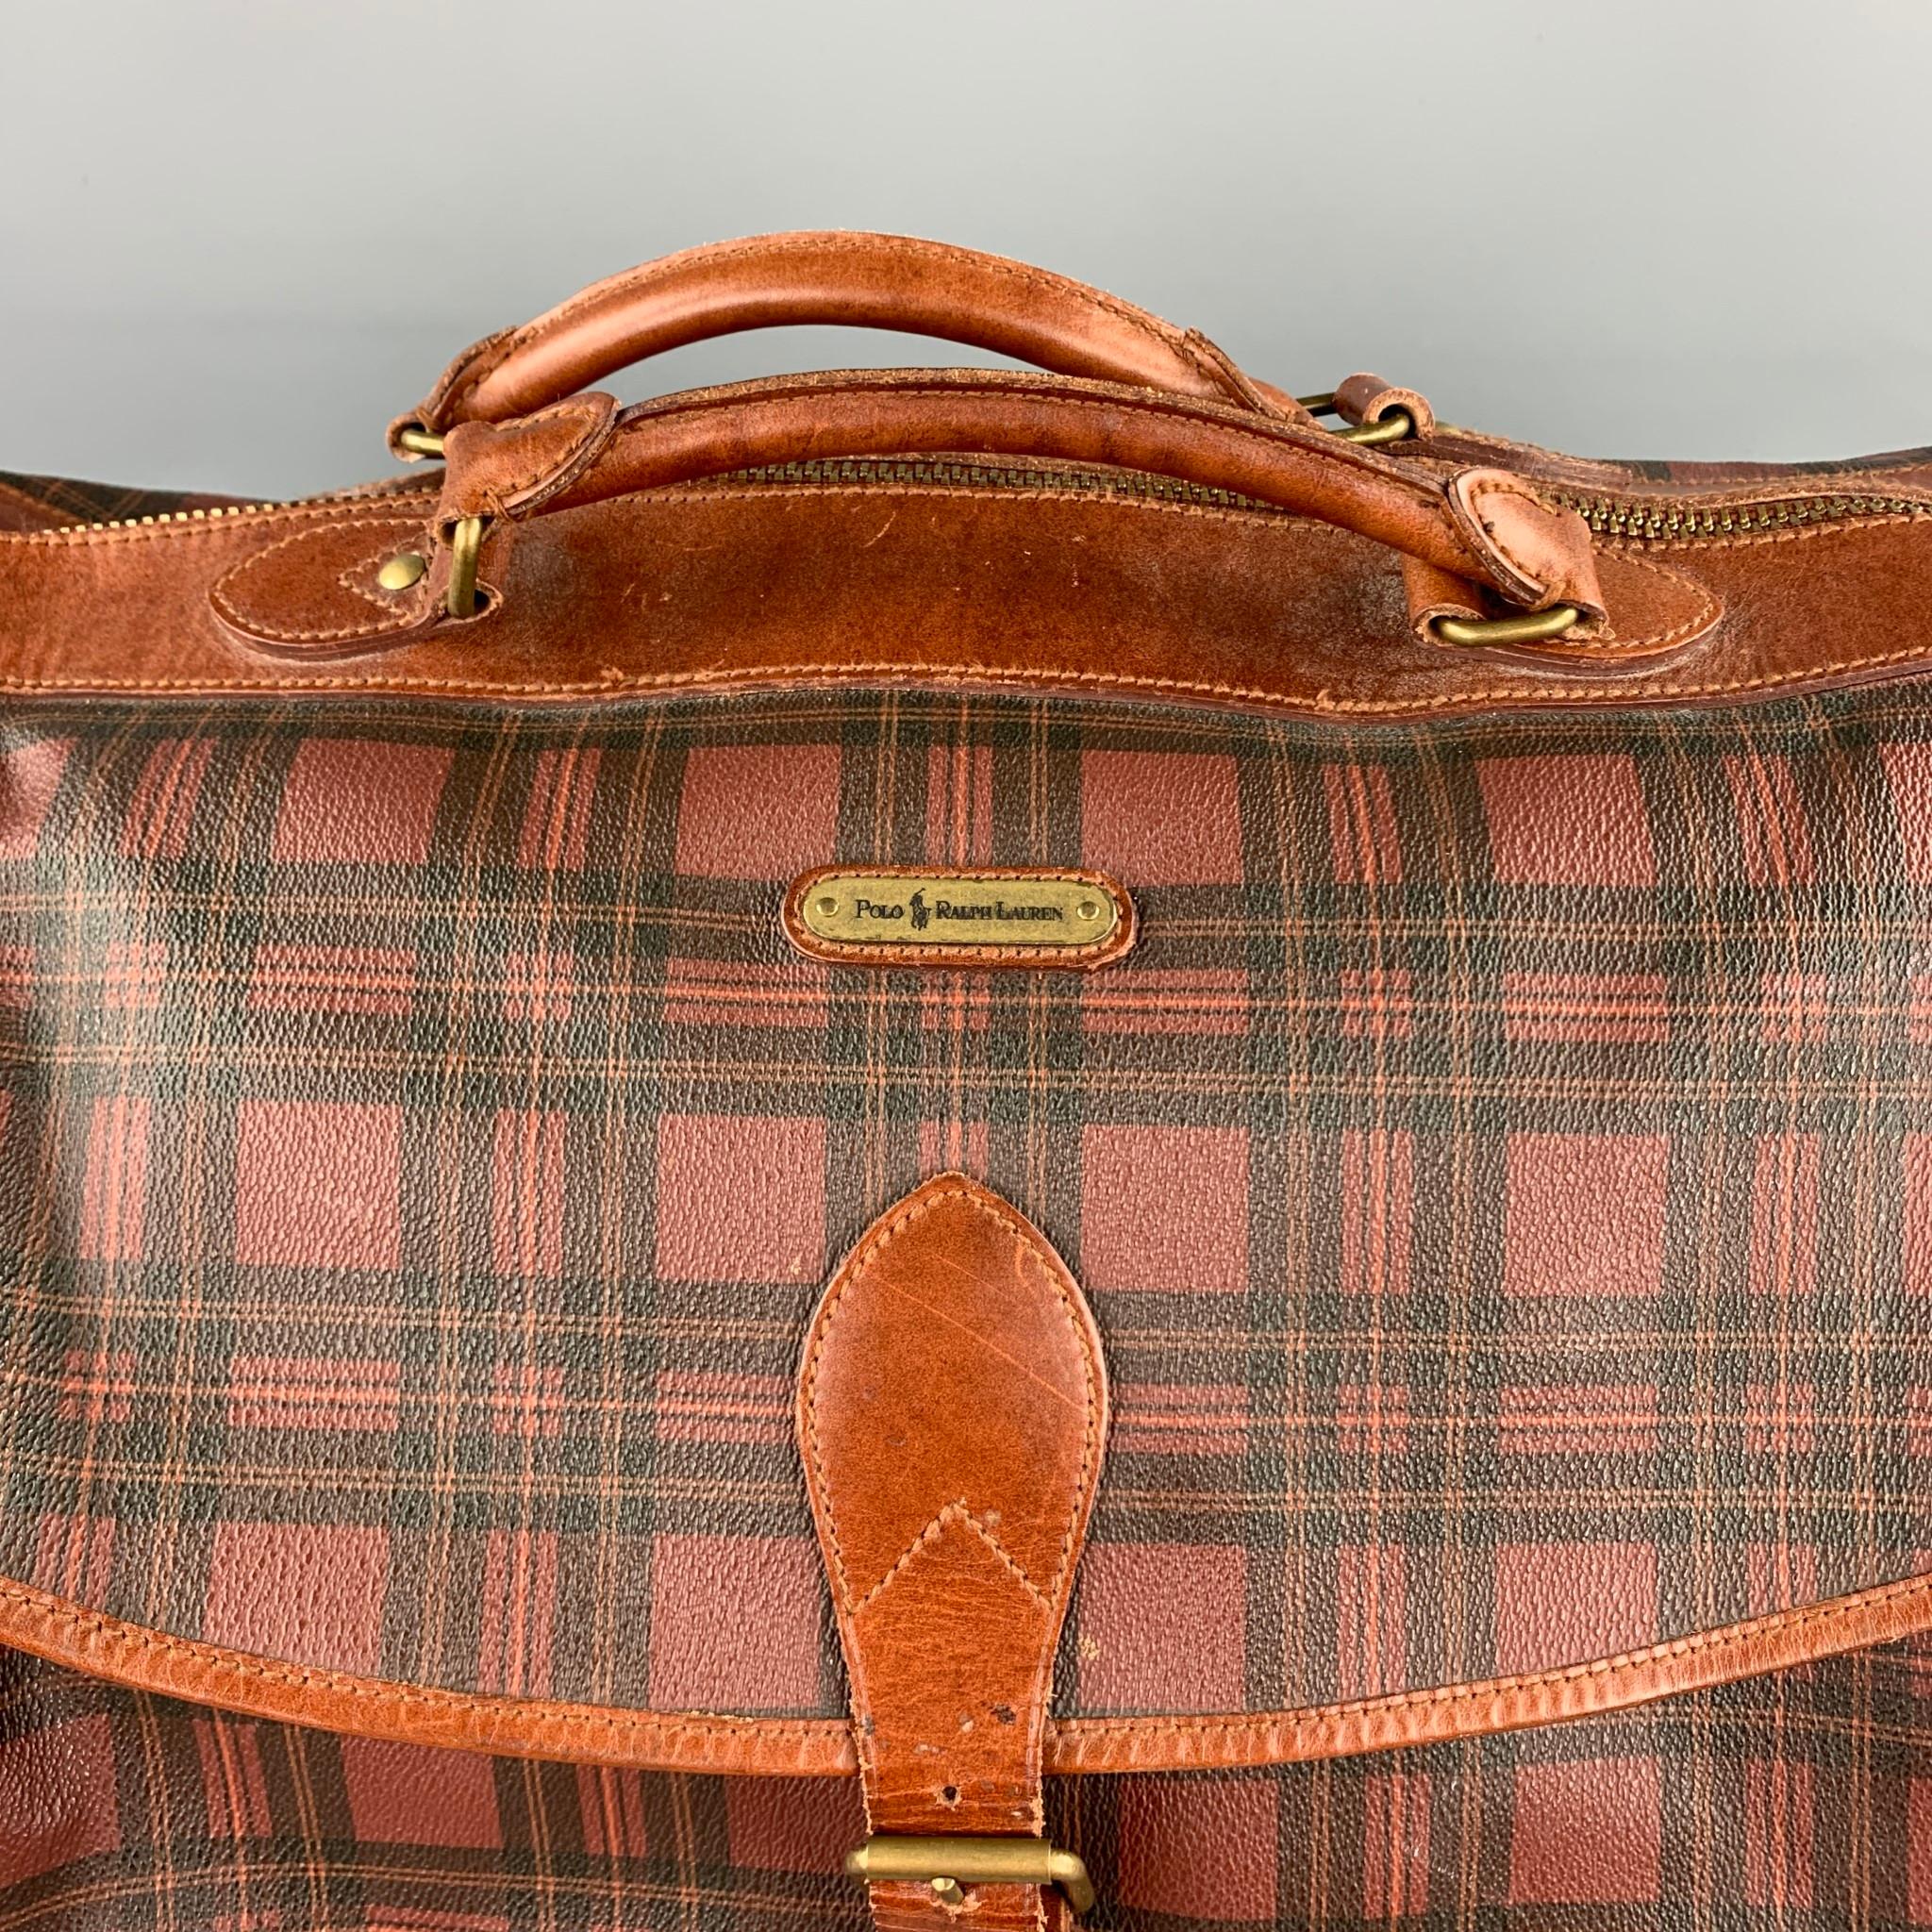 Vintage POLO by RALPH LAUREN bag comes in a brown & black plaid coated canvas featuring a travel style, shoulder strap, front pocket, and a zip up closure.

Good Pre-Owned Condition.

Measurements:

Length: 21 in.
Width: 10 in.
Height: 12 in.
Drop: